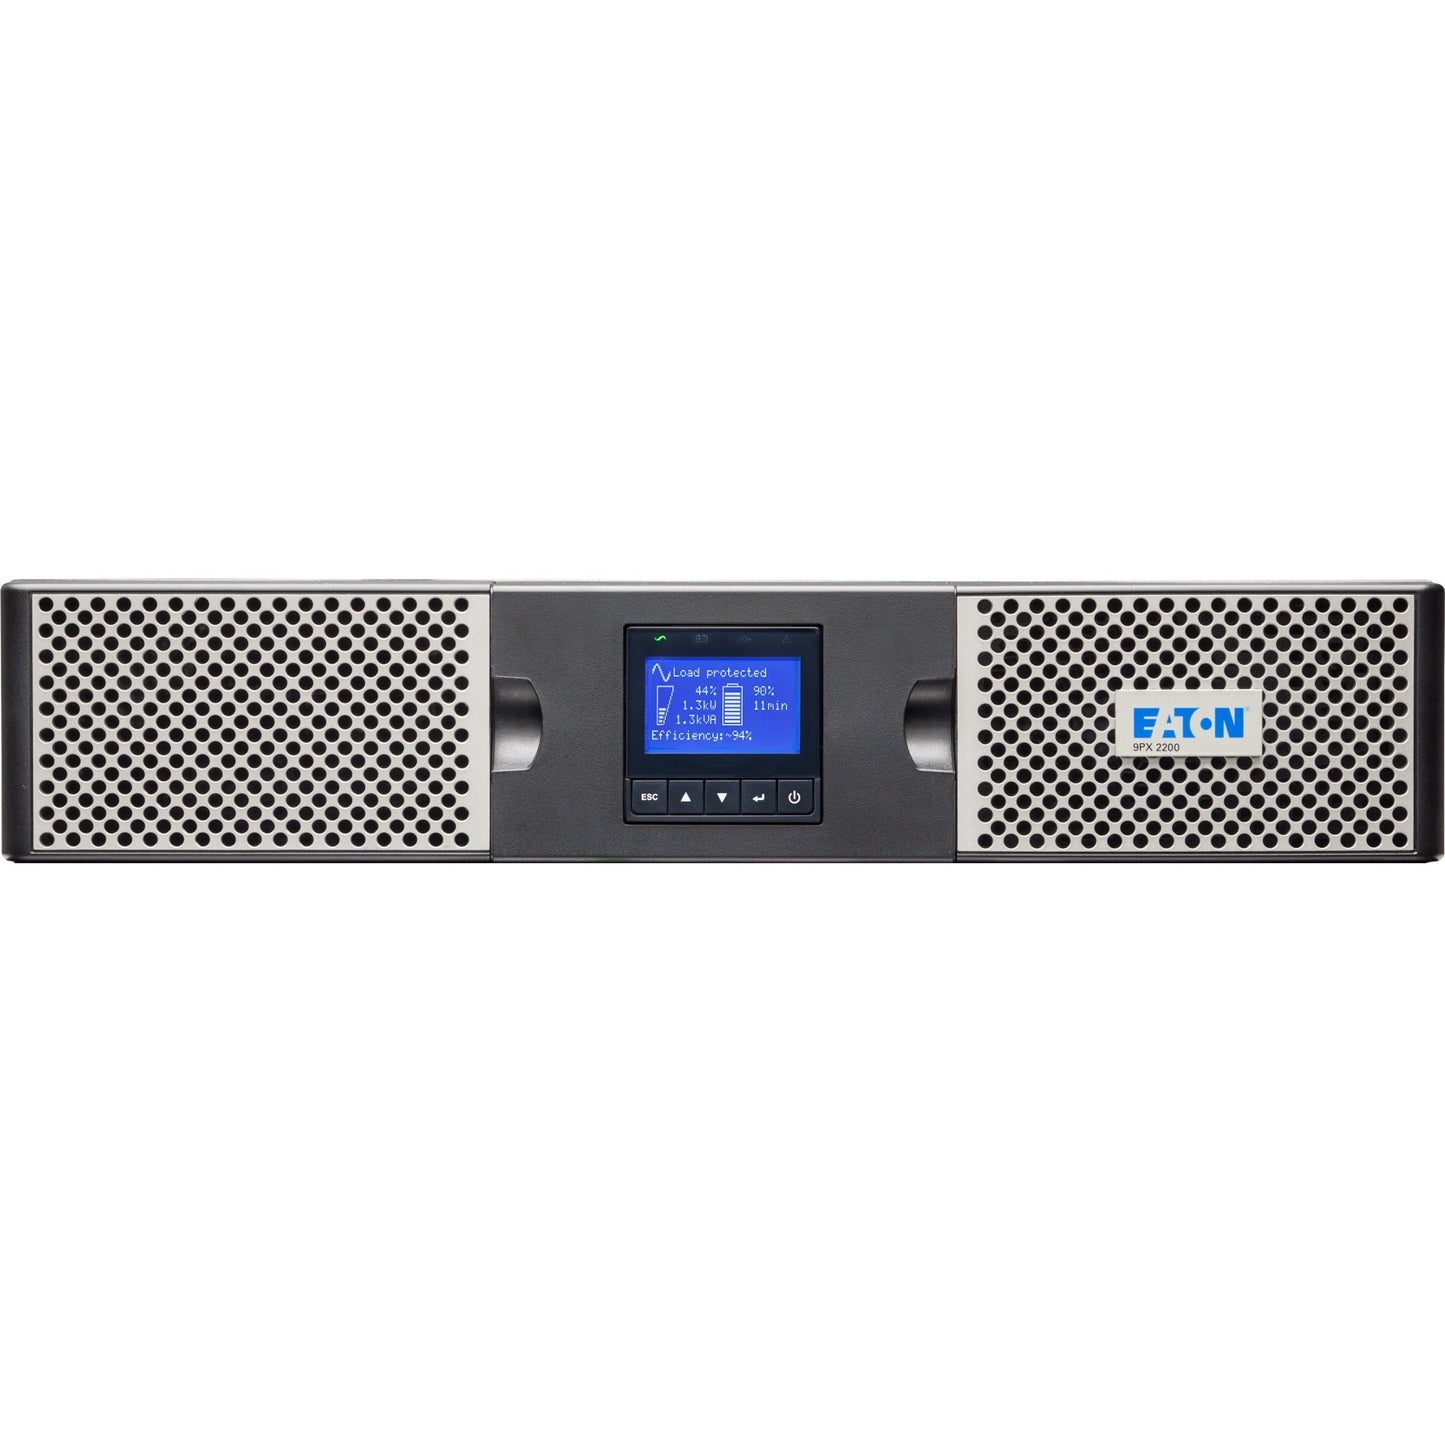 Eaton 9PX 3000VA 3000W 208V Online Double-Conversion UPS - L6-20P 2 L6-20R 1 L6-30R Outlets Cybersecure Network Card Option Extended Run 2U Rack/Tower